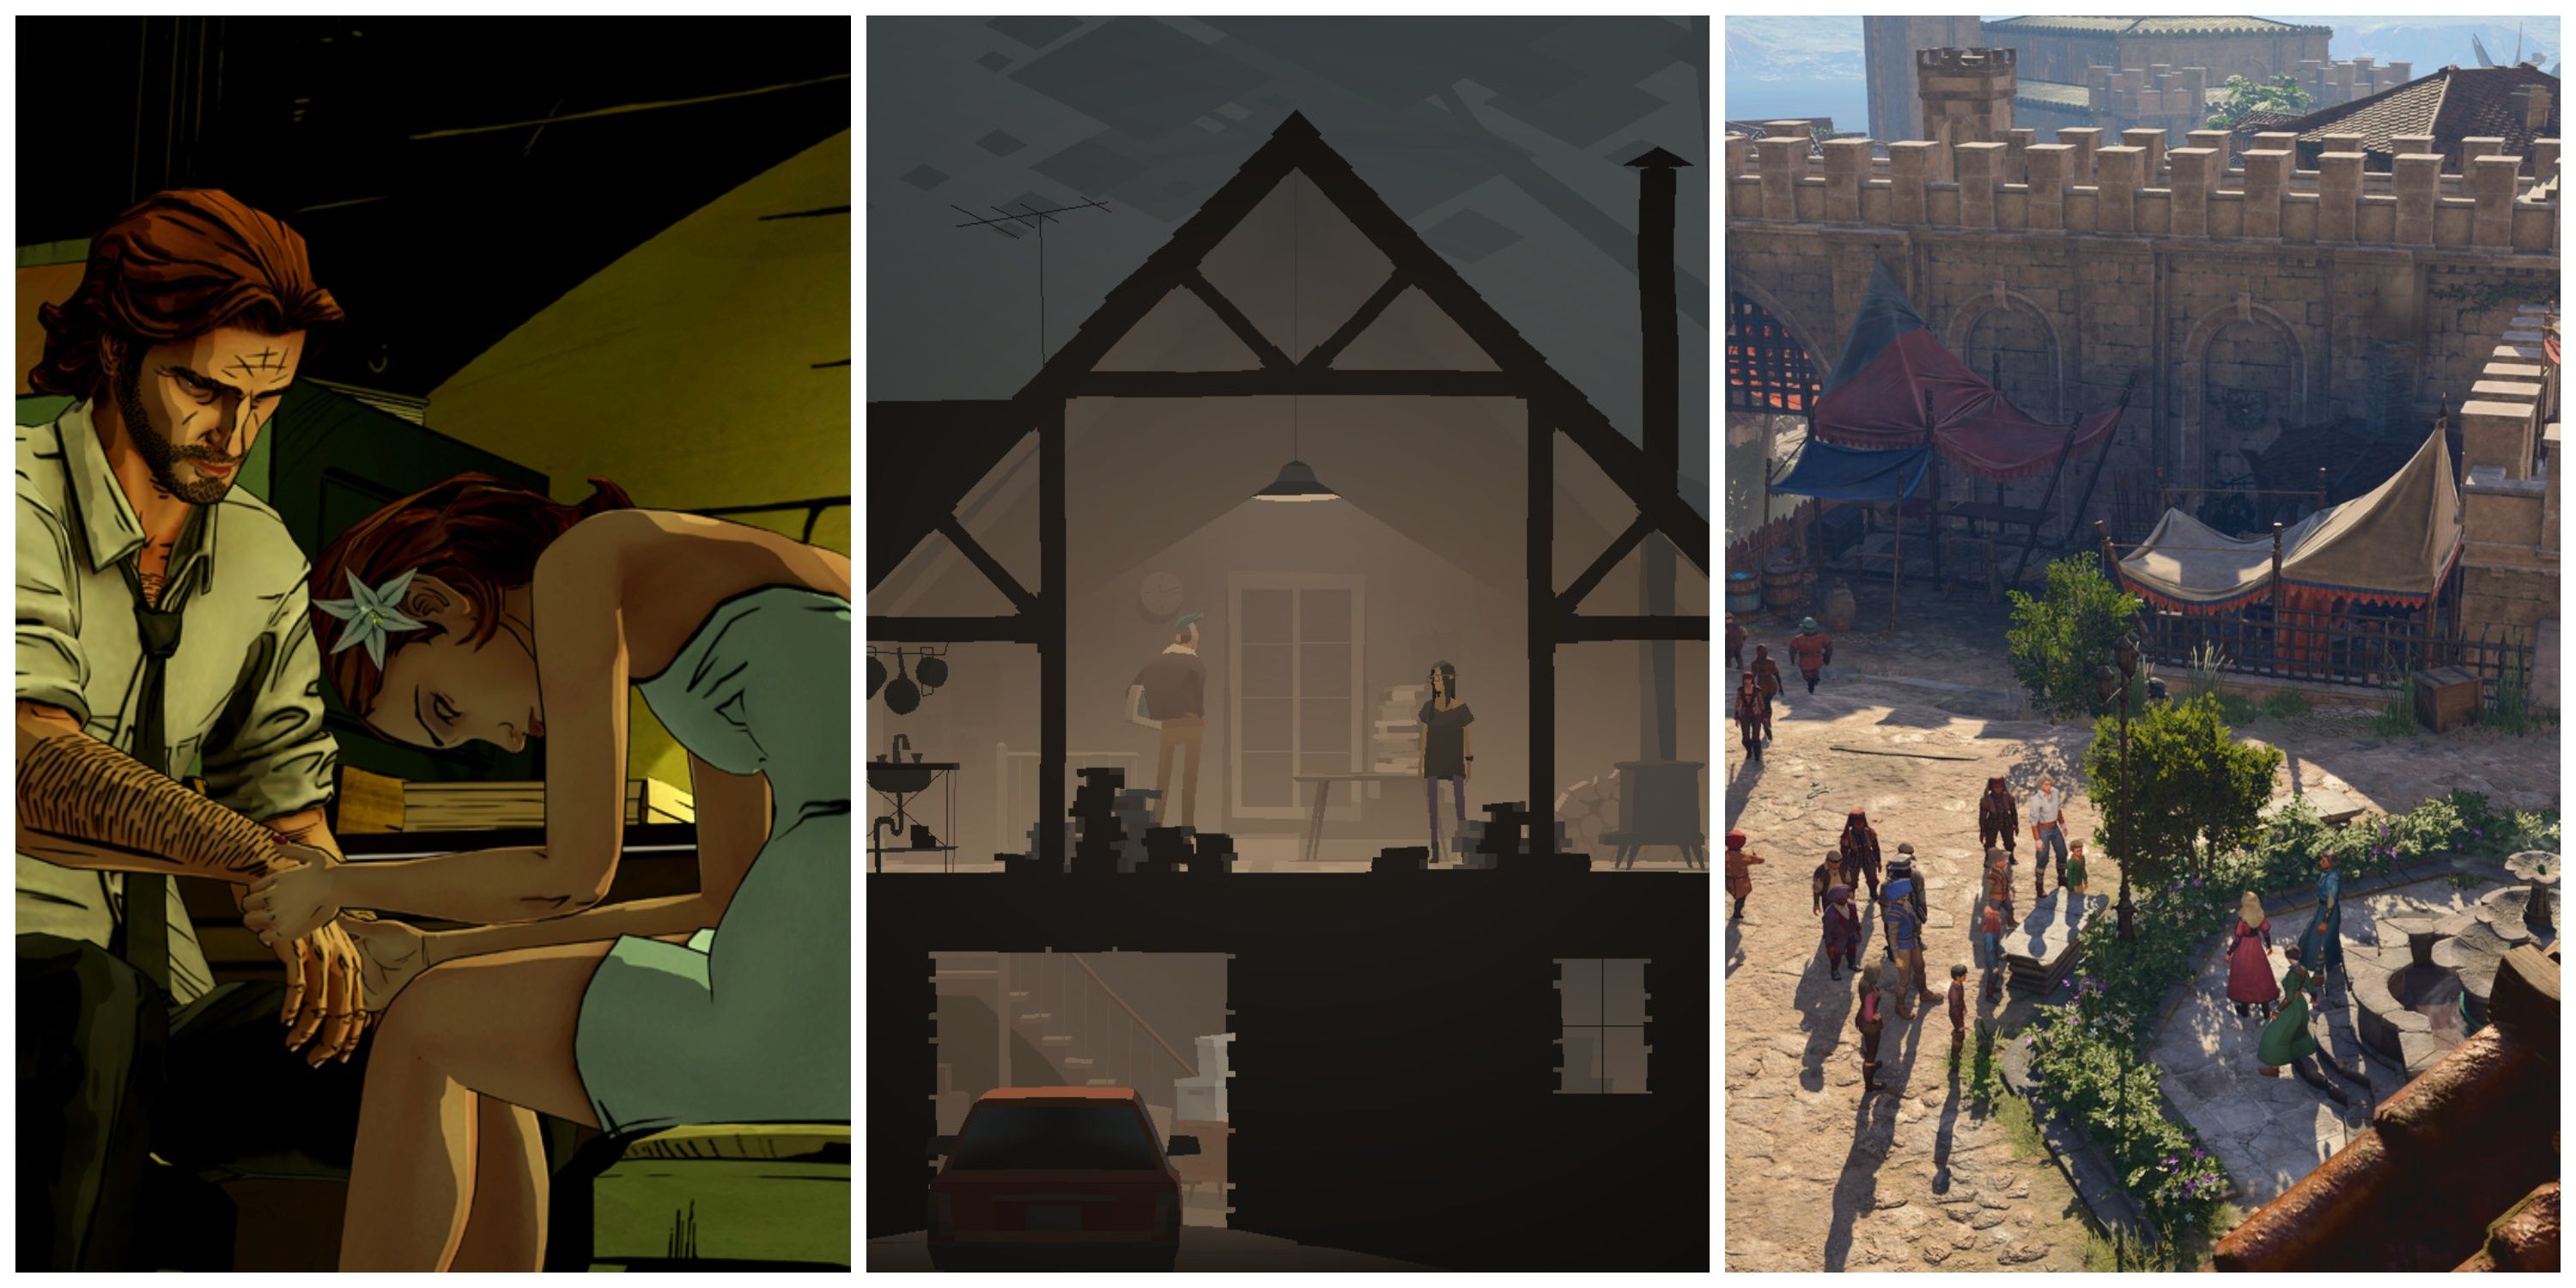 Great Story-Driven Games That Launched With No Endings (Featured Image) - The Wolf Among Us + Kentucky Route Zero + Baldur's Gate 3